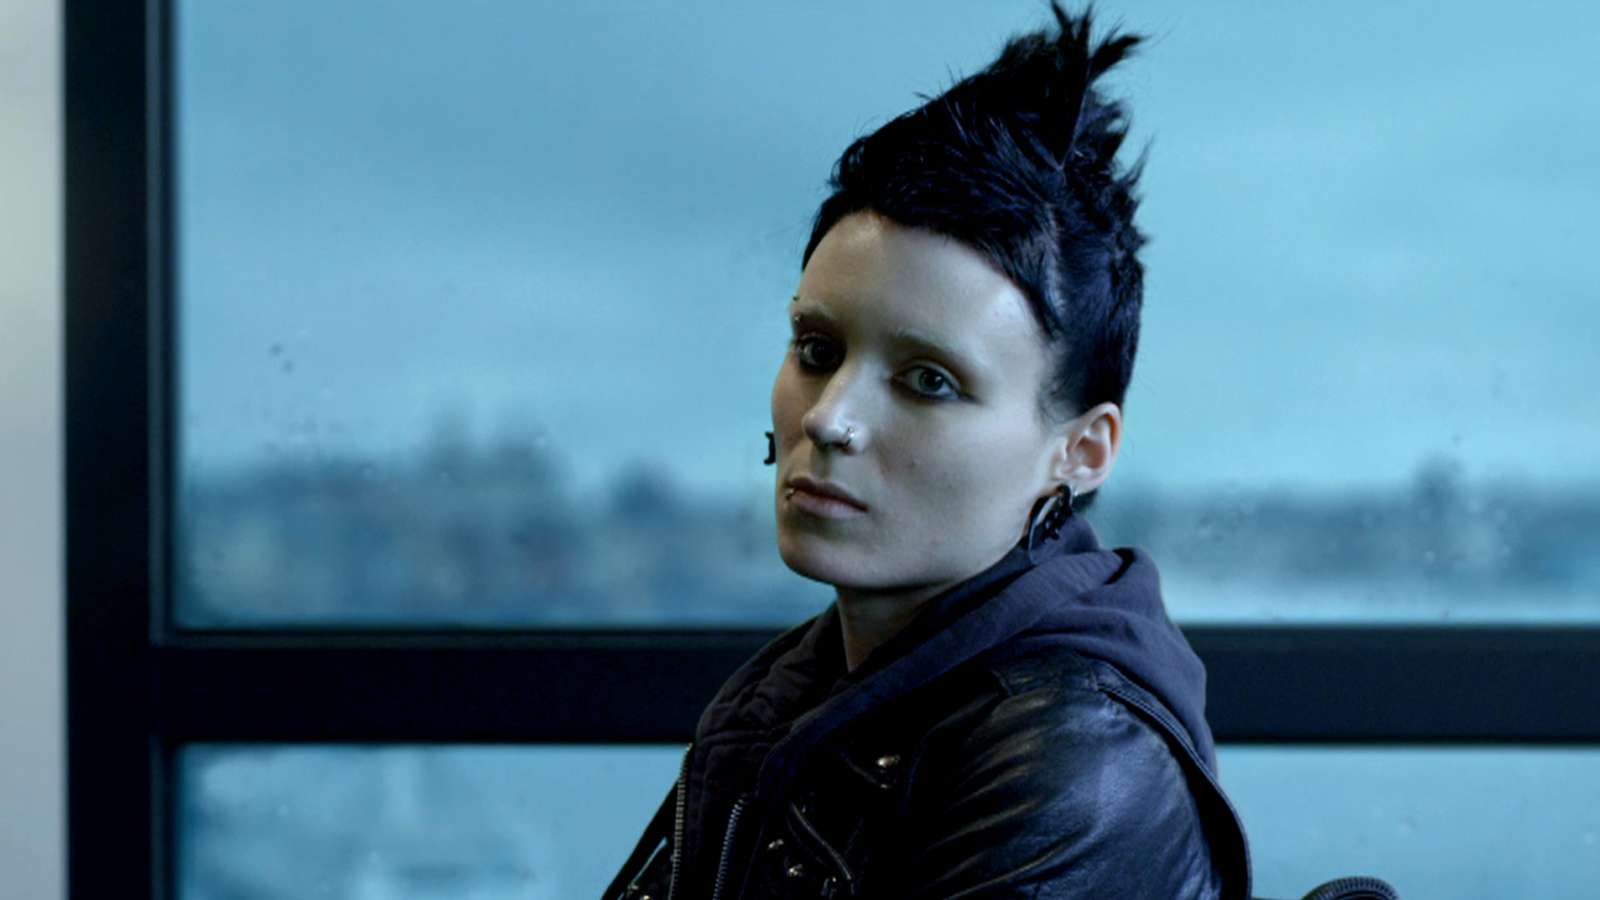 The Girl With The Dragon Tattoo #2